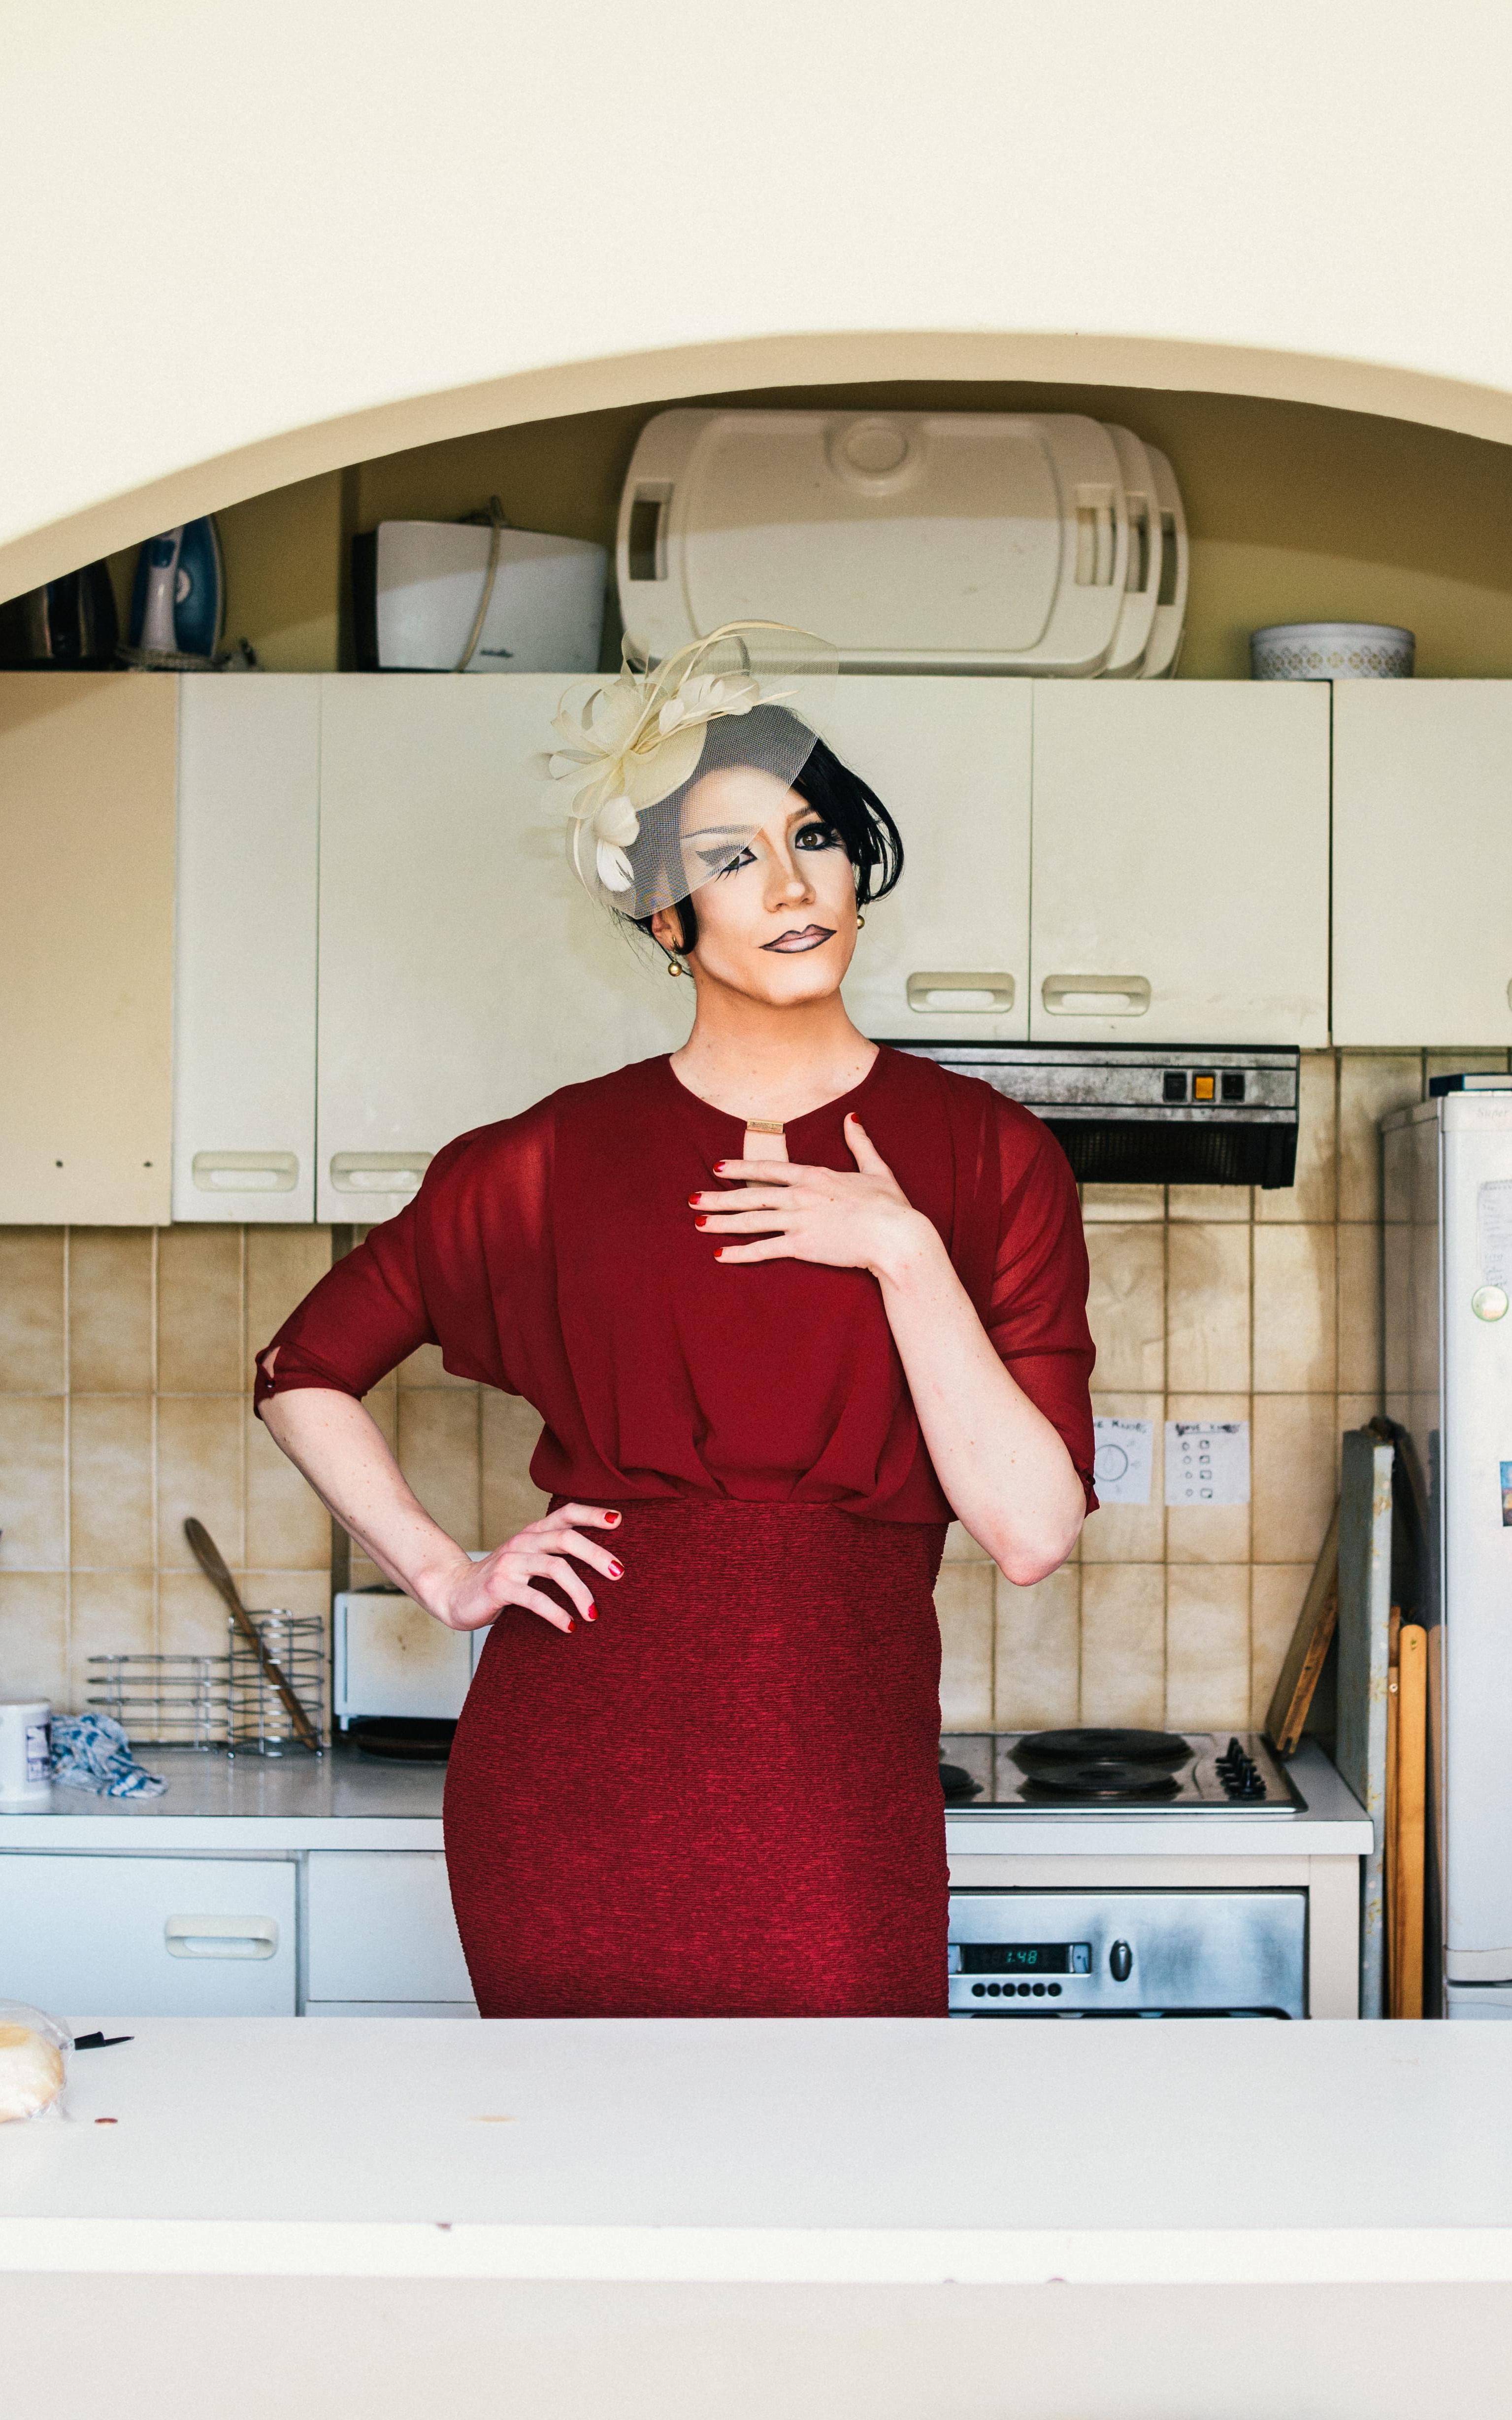 Man in drag standing in a kitchen